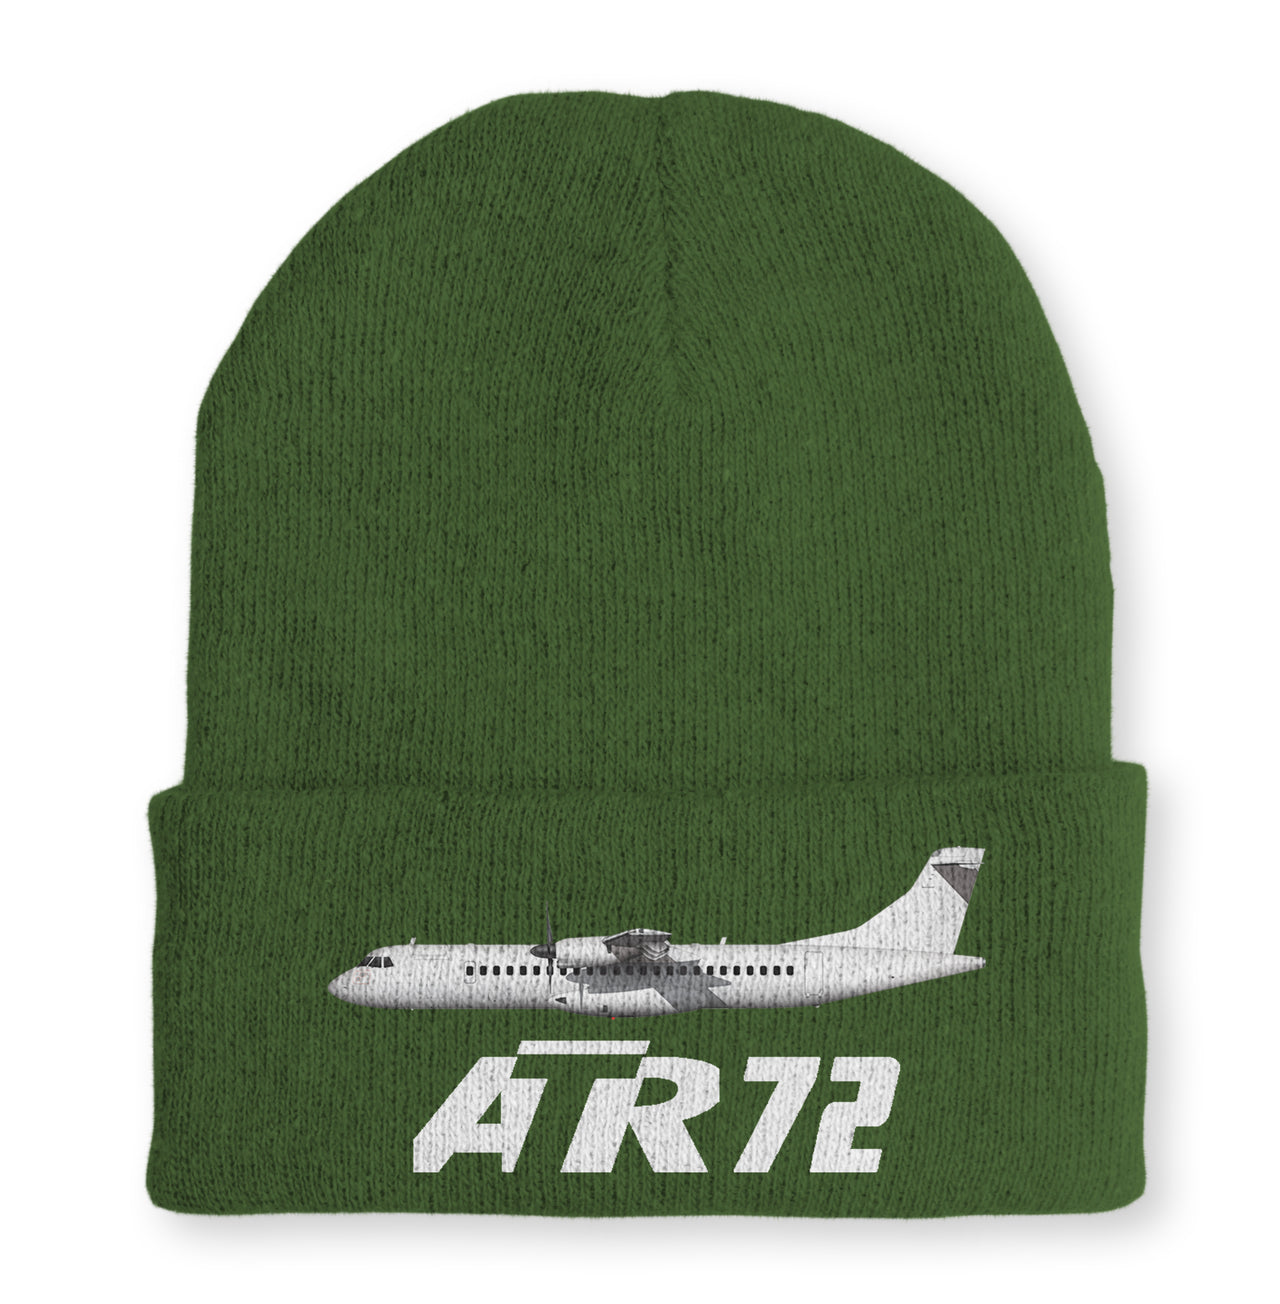 The ATR72 Embroidered Beanies